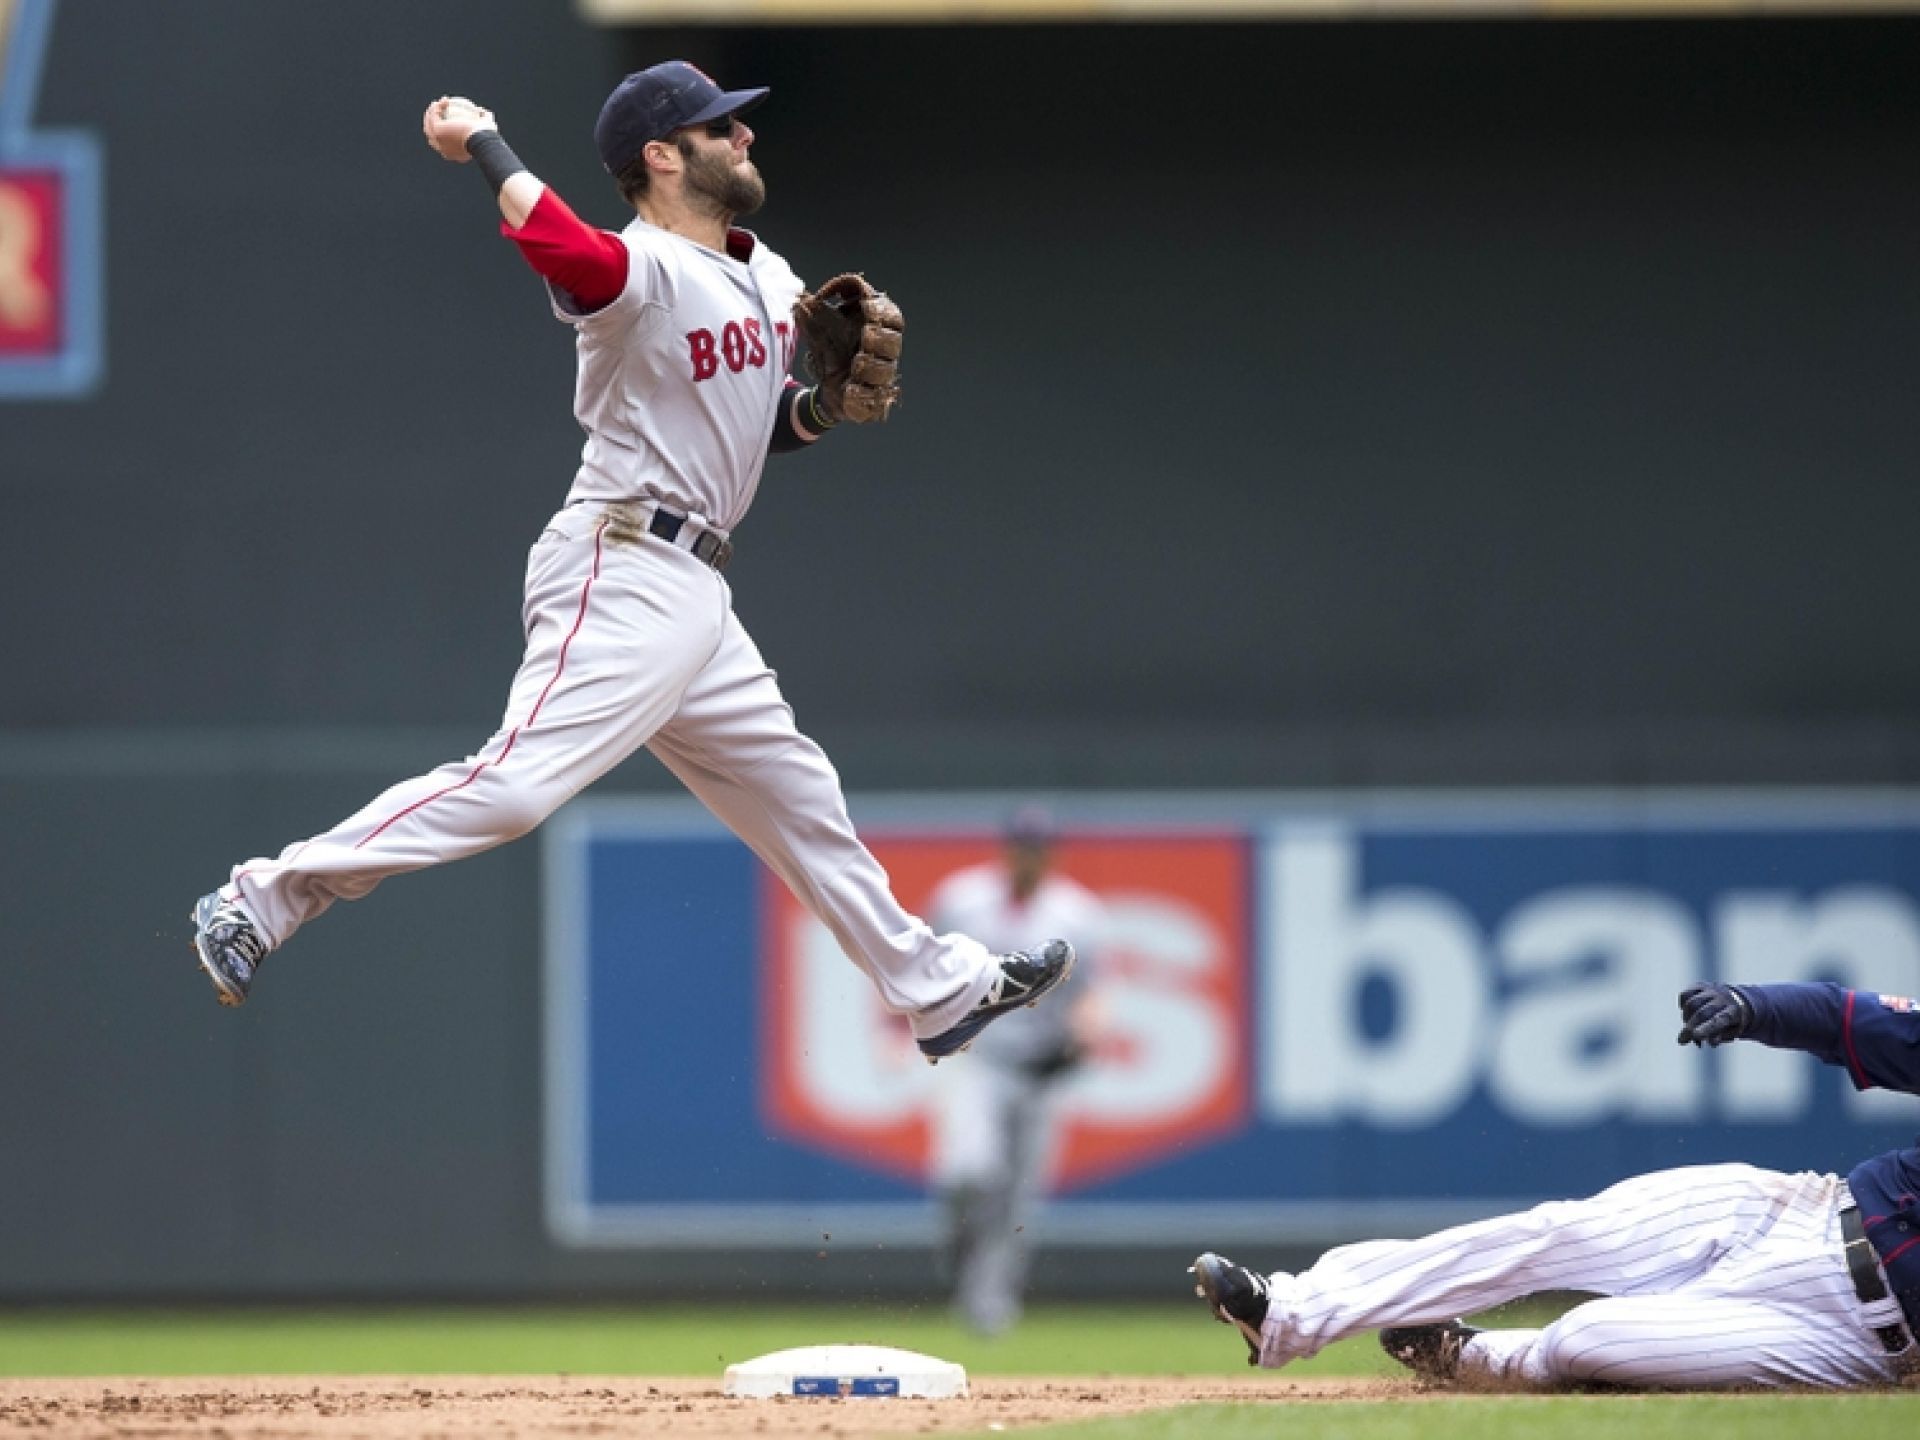 Boston Red Sox: second baseman in franchise history